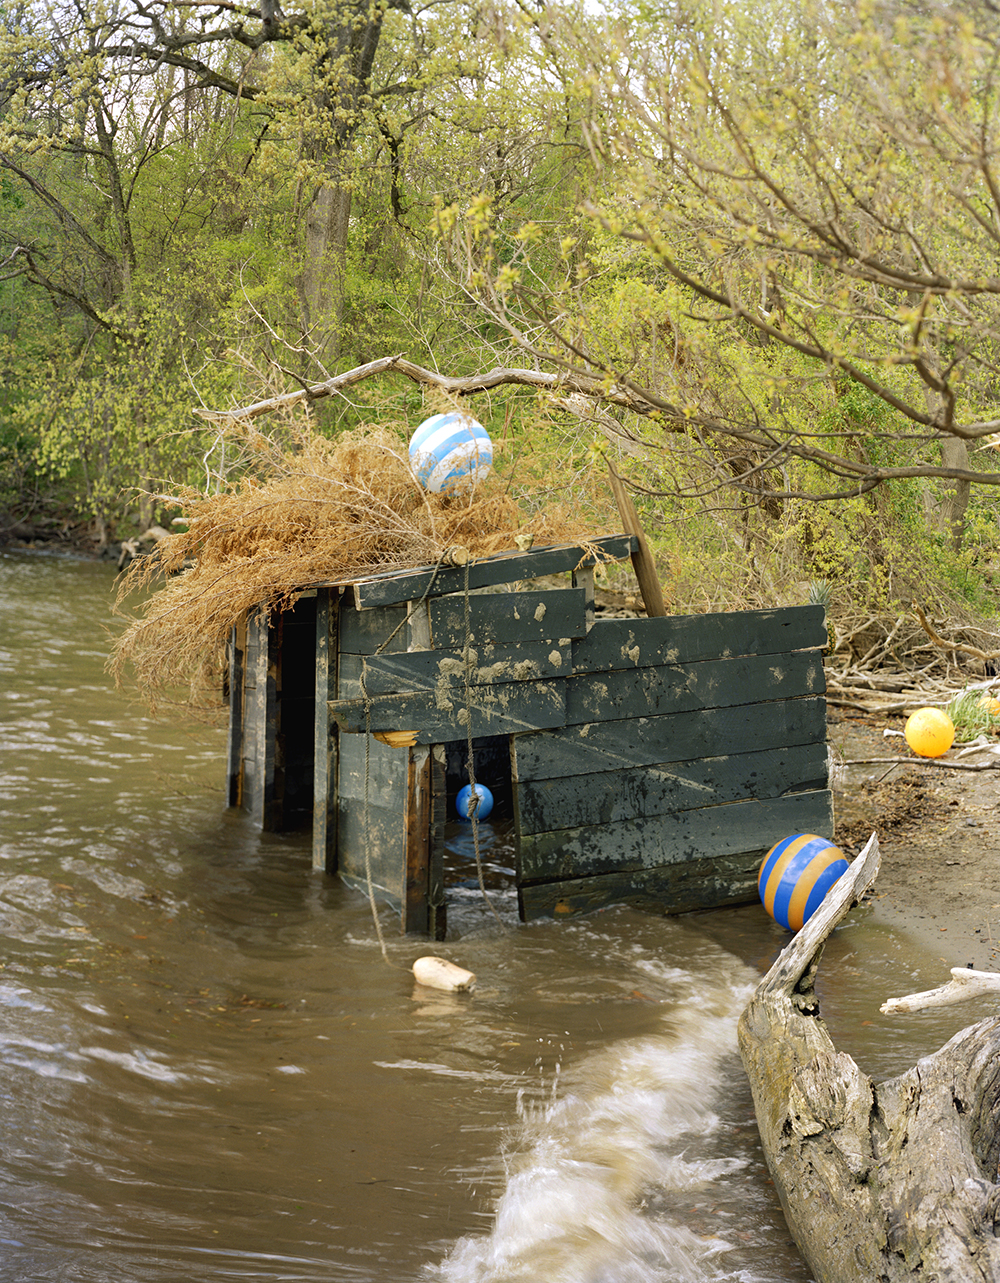 In the middle of a green flowing river is a black wooden shack that is worn down and flooded halfway. The thick branch of a yellowing tree has fallen on top of it. Sprinkled around the river and shack are several blue, yellow, and white beach balls in polka dots, stripes, and solid colors. One is on top of the shack. Another is inside it, floating on water. Two are resting on the shoreline. 